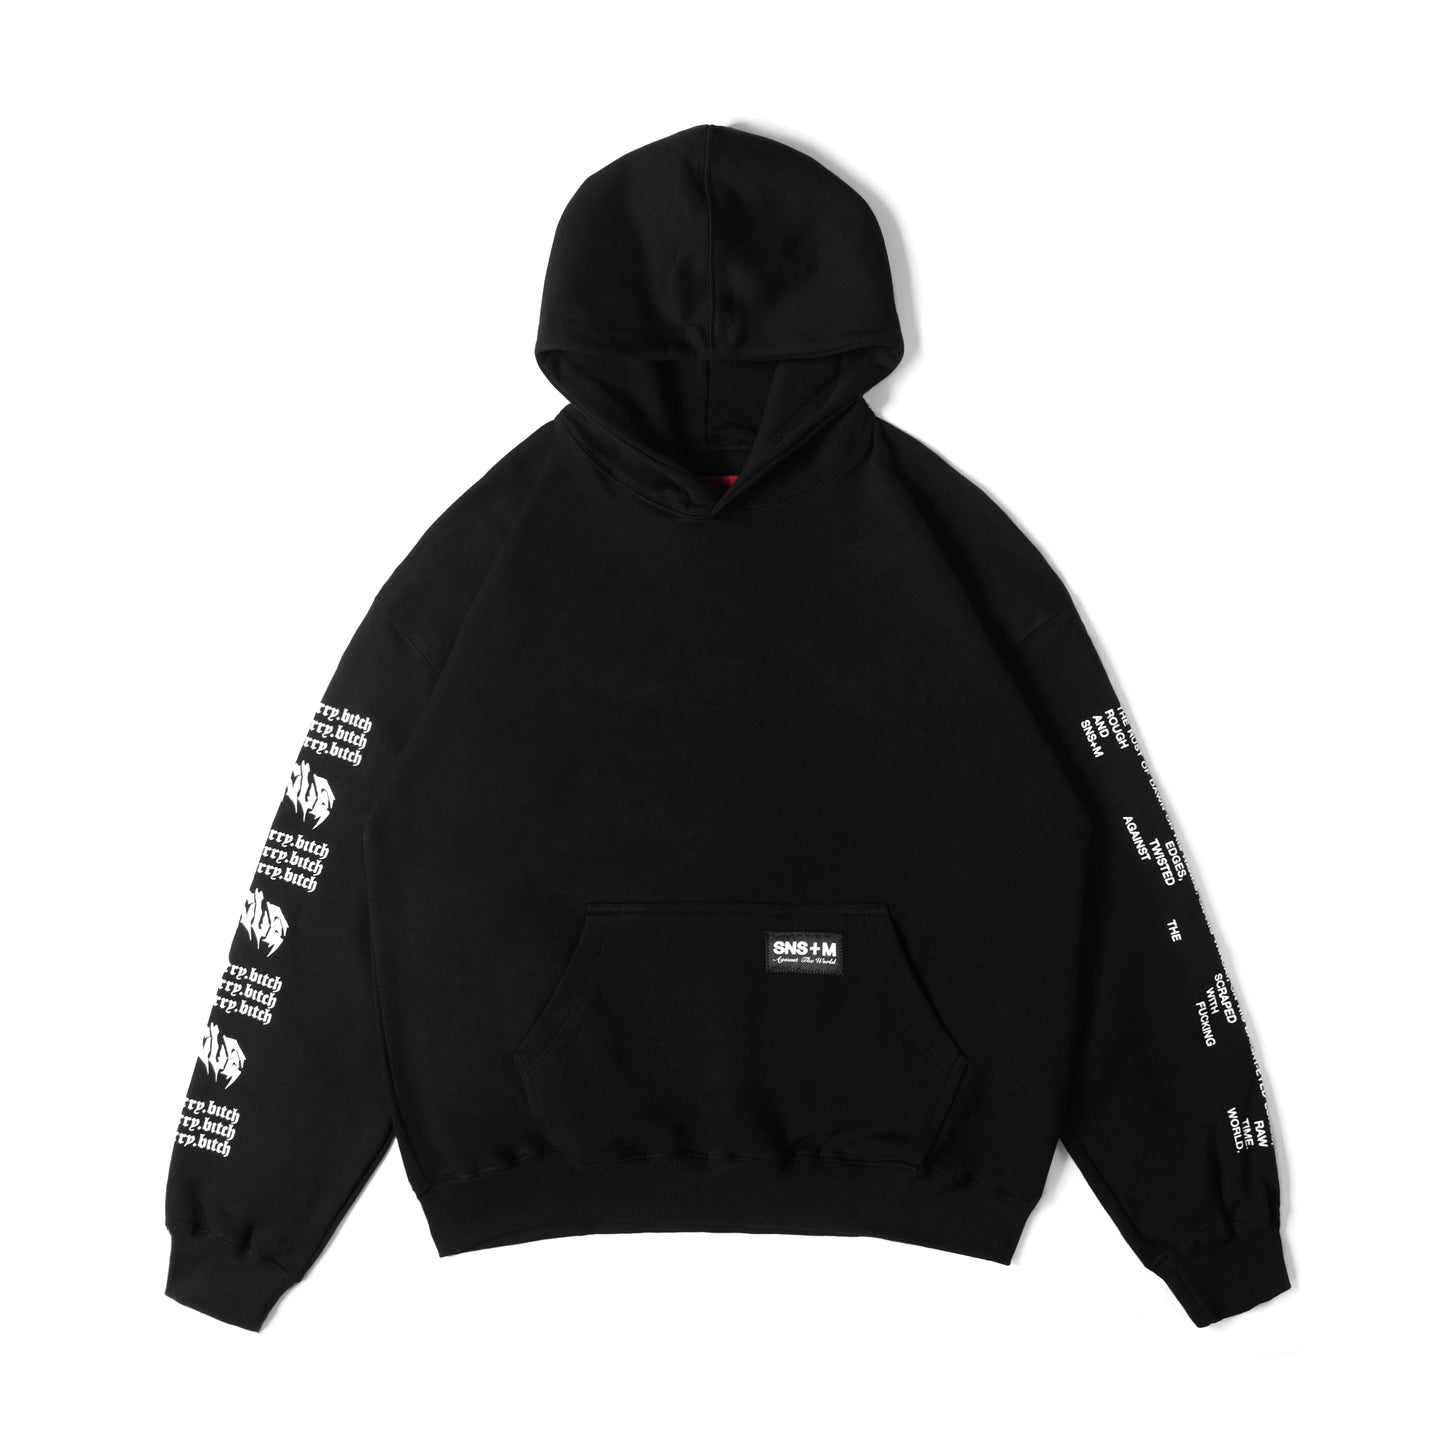 Miracle Mates - Feature Black Hoodie Collaboration SNSB